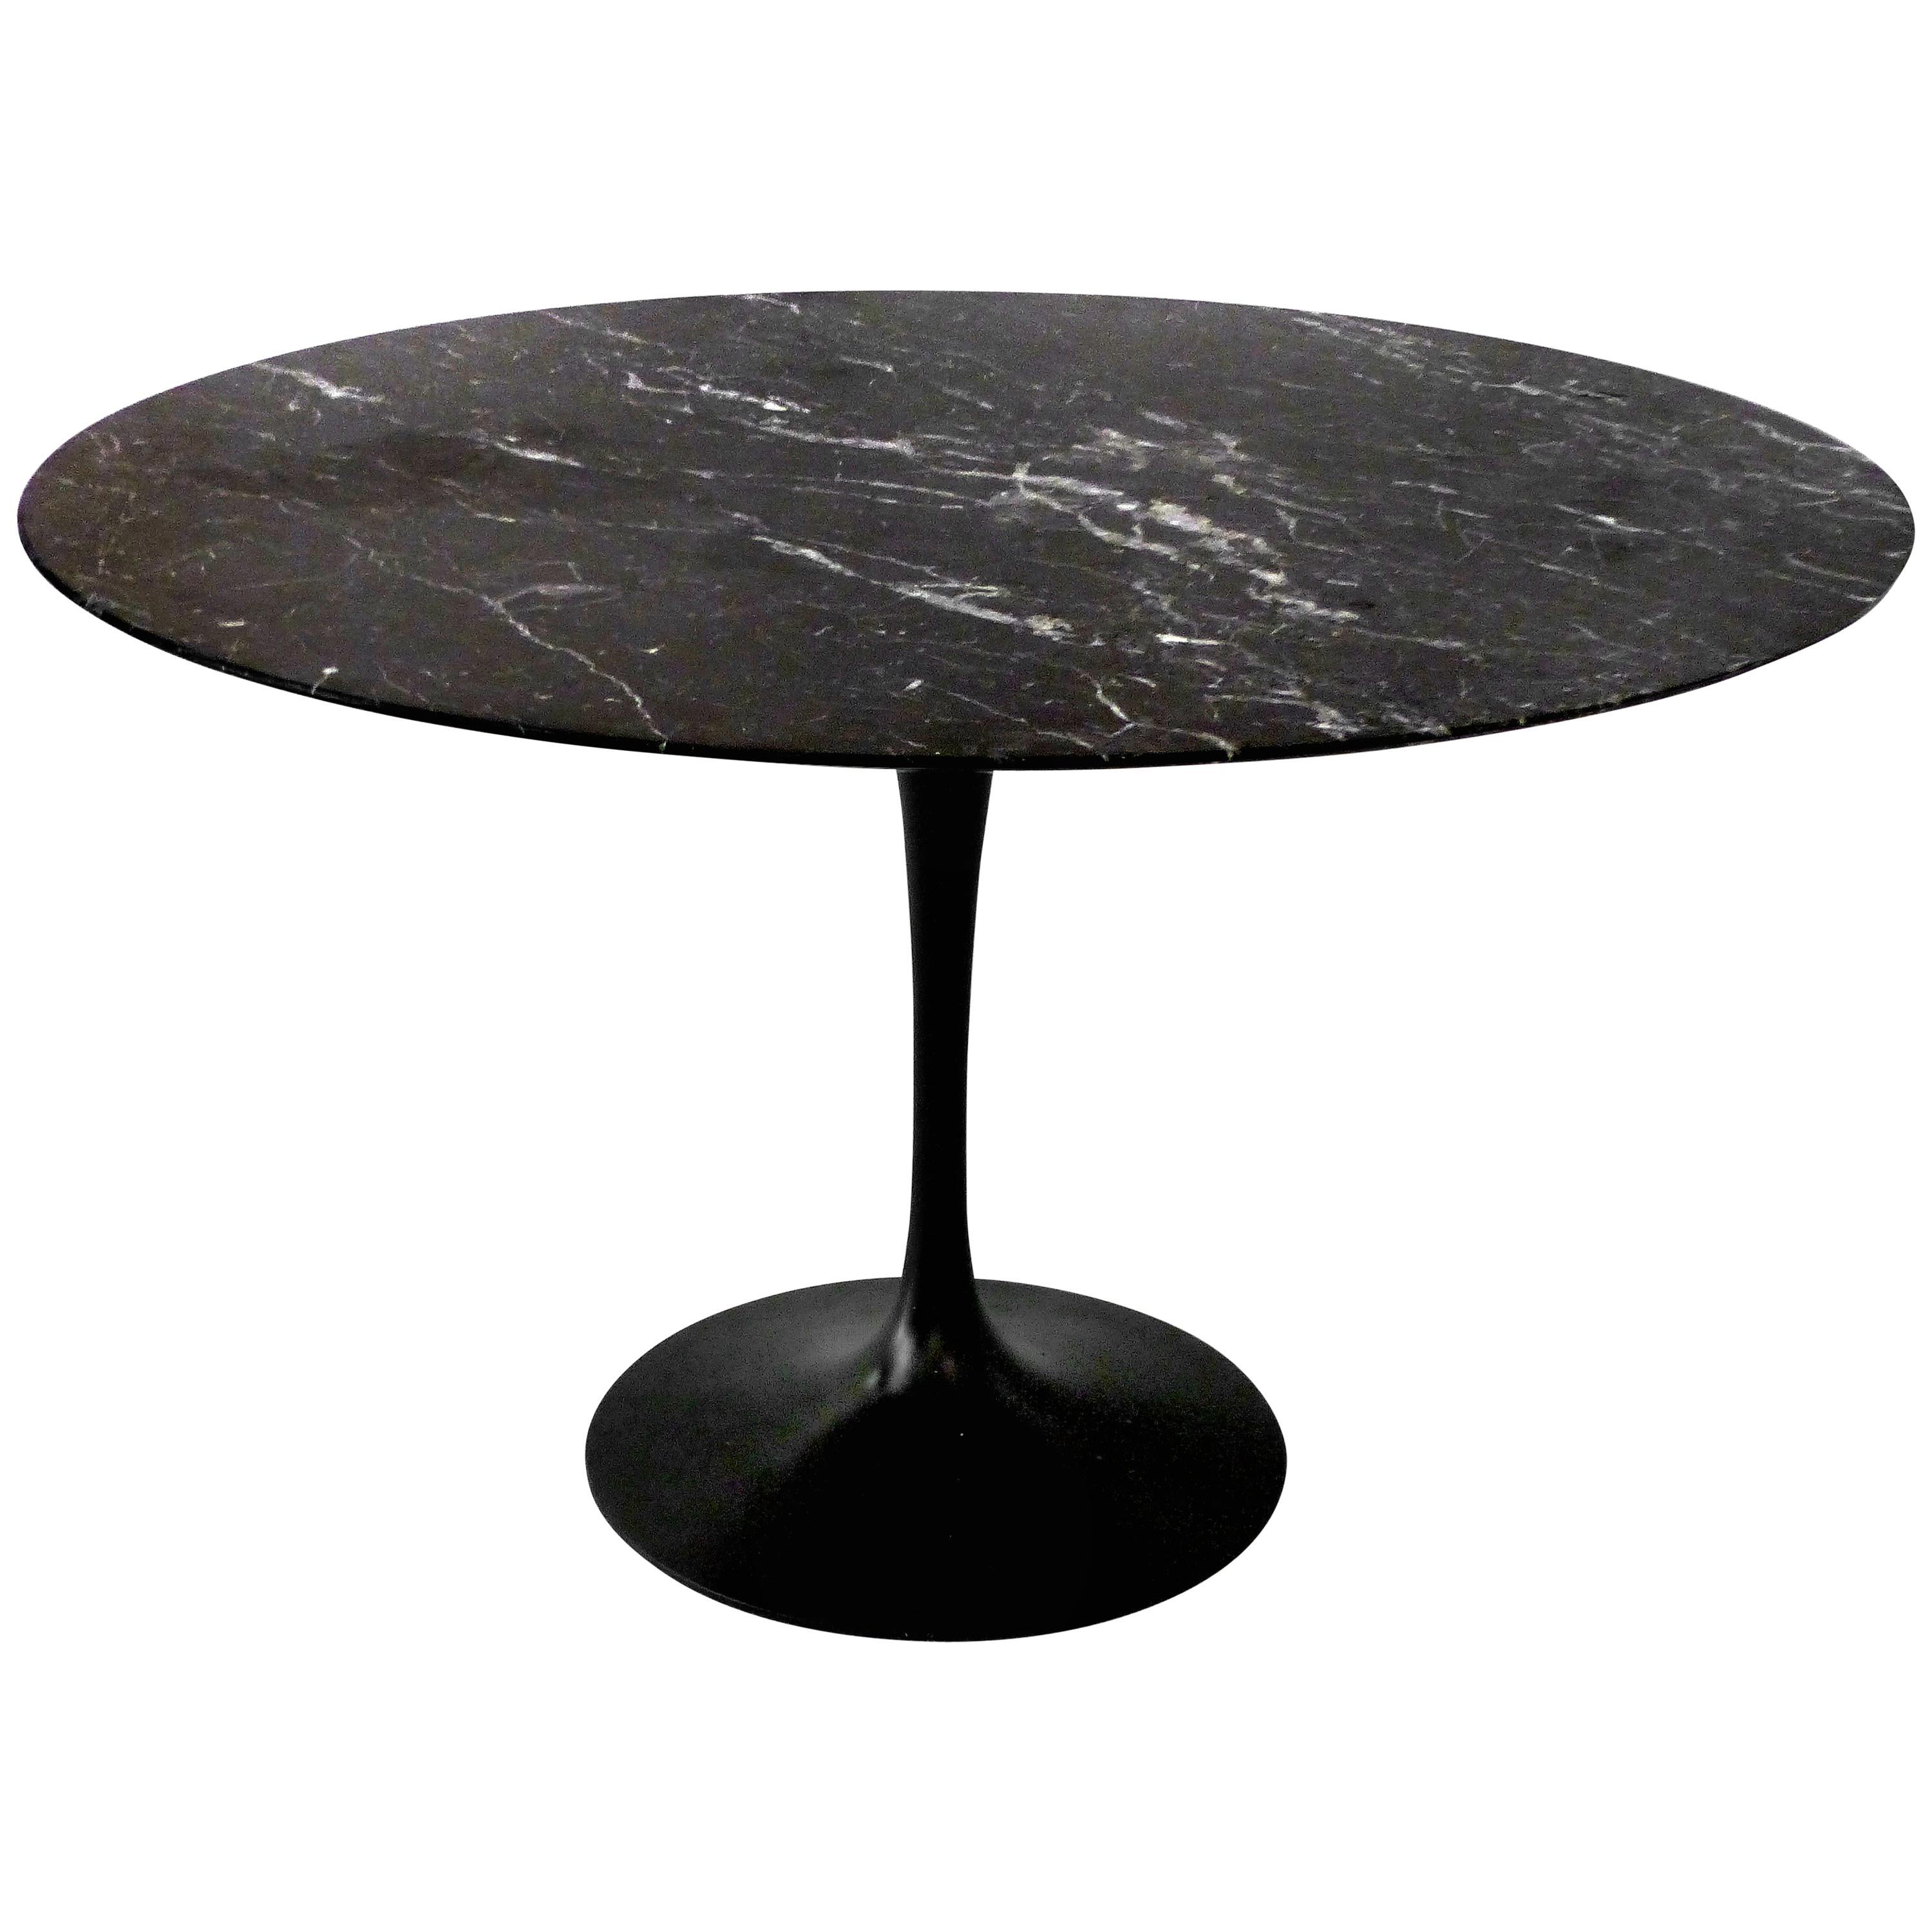 Round Marble-Top Tulip Table in the Style Eero Saarinen for Knoll